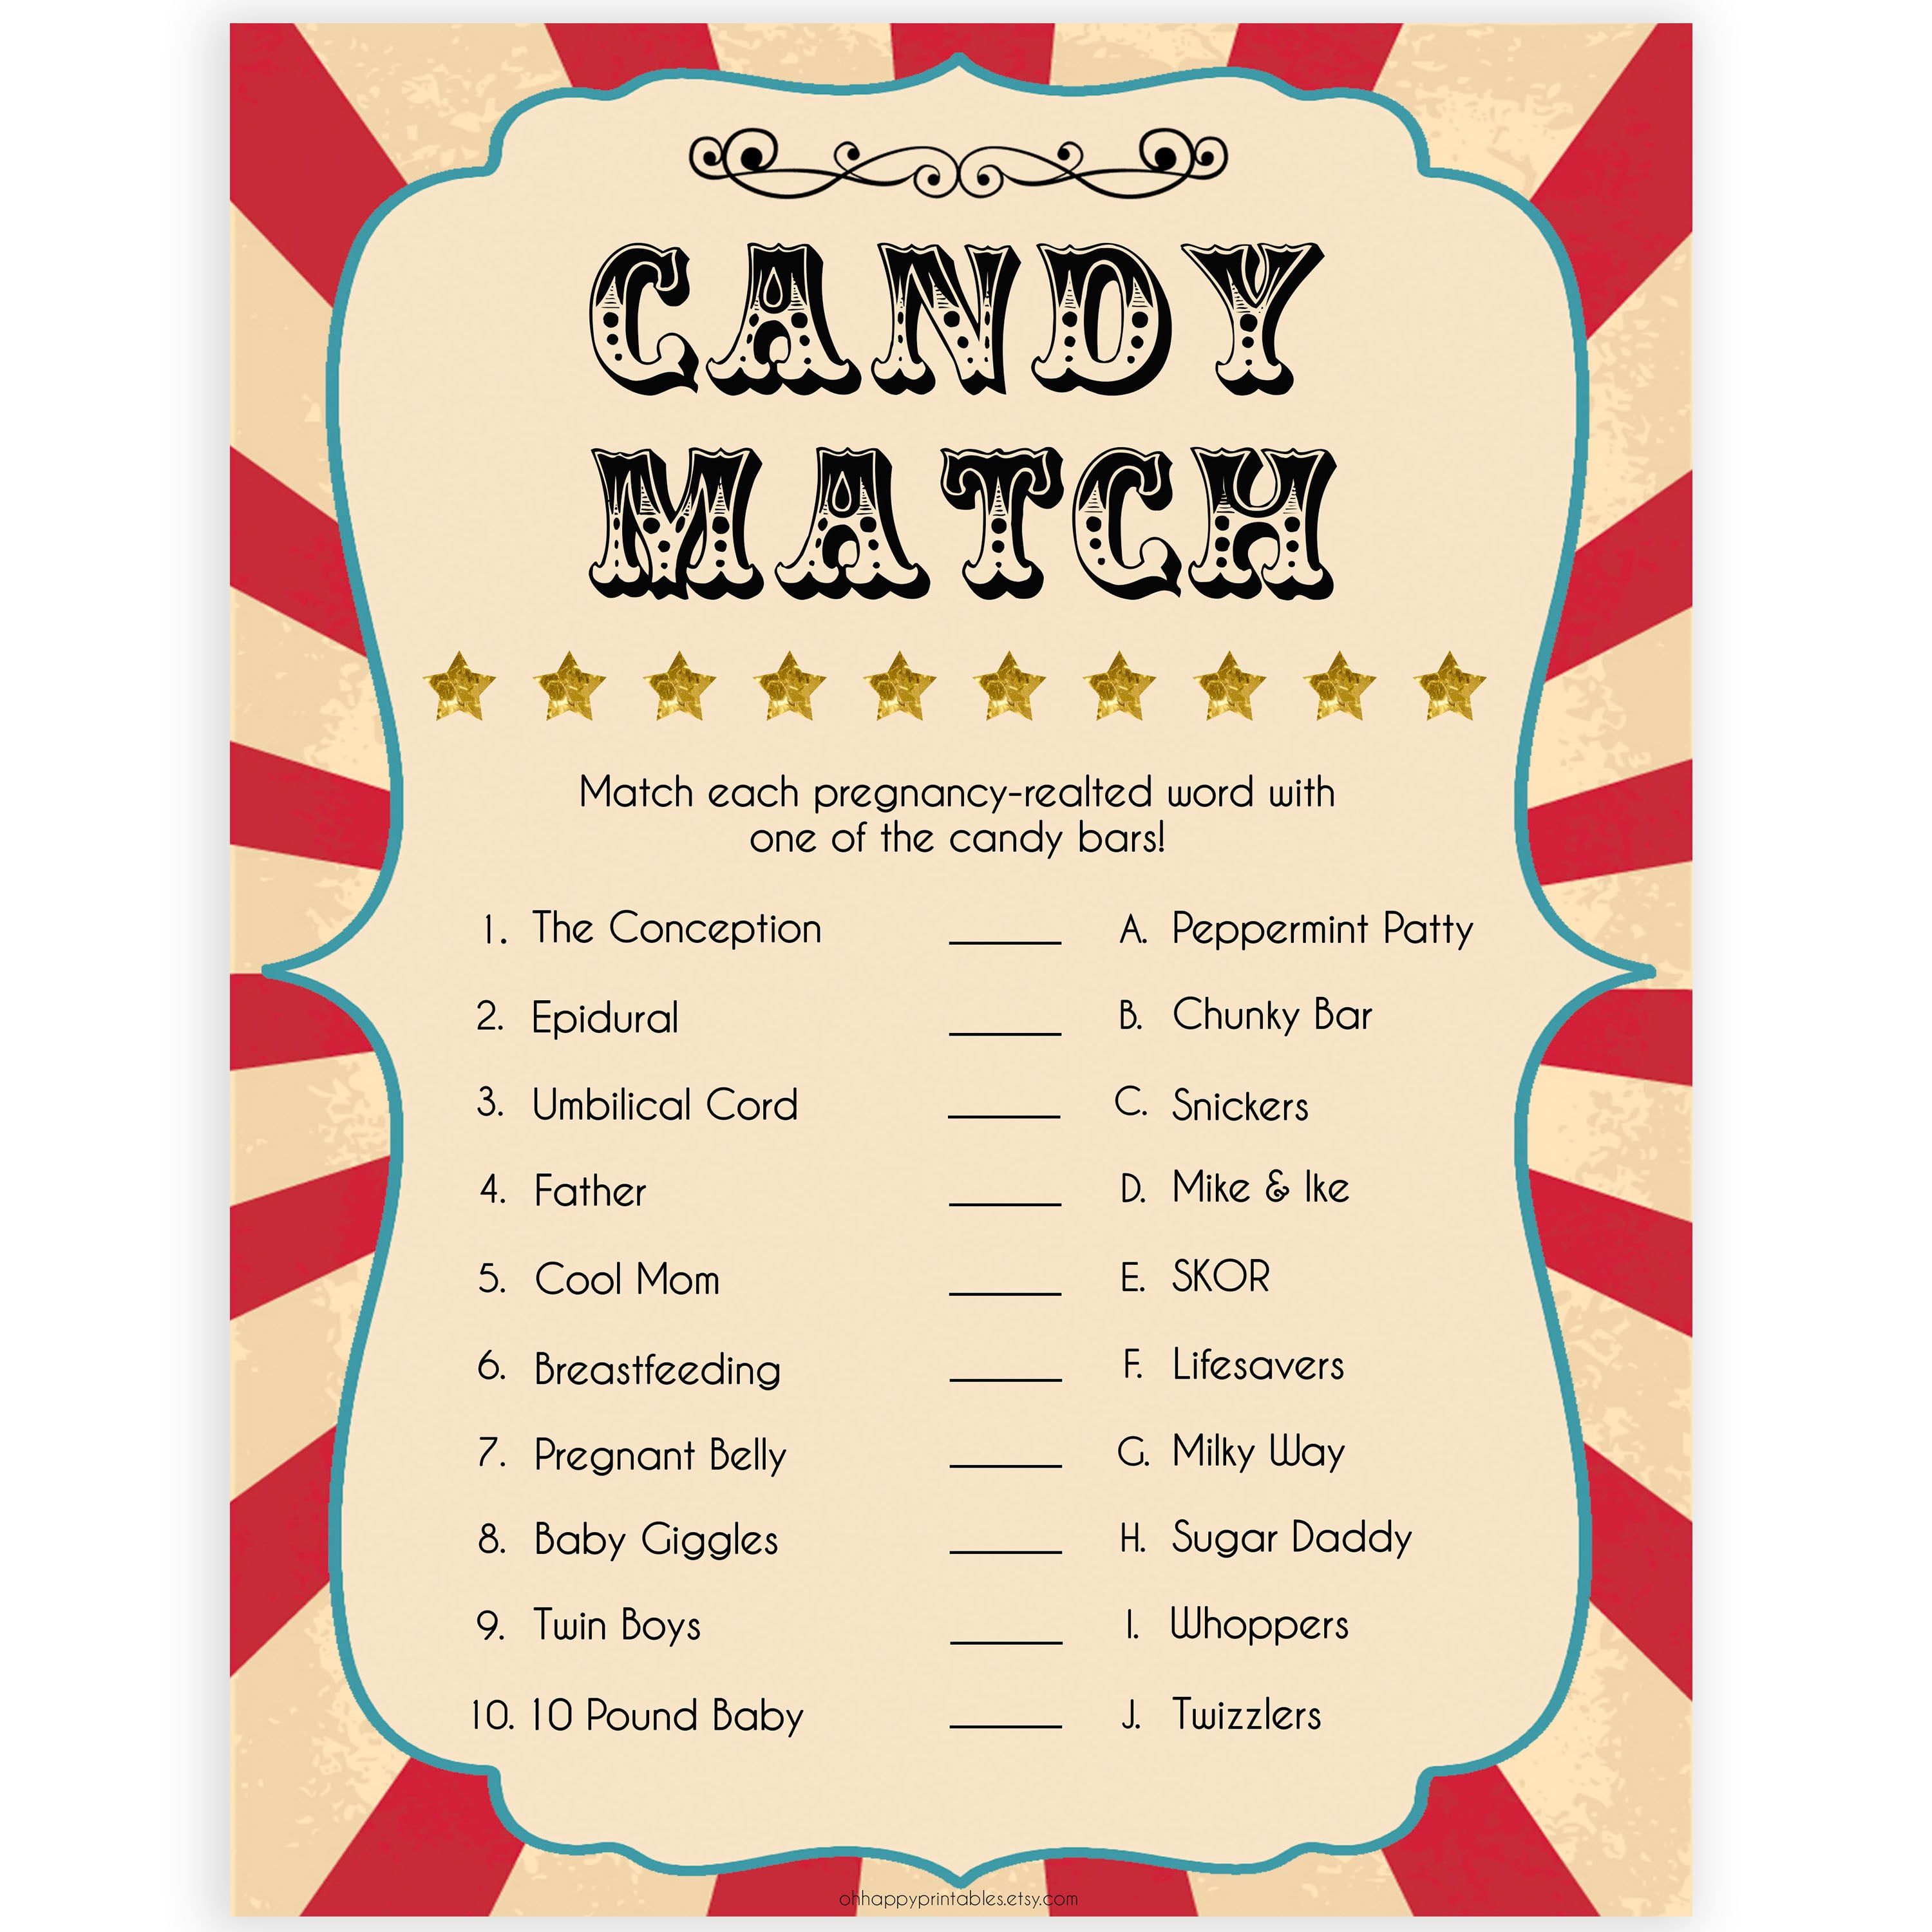 Circus pregnancy candy match baby shower games, circus baby games, carnival baby games, printable baby games, fun baby games, popular baby games, carnival baby shower, carnival theme